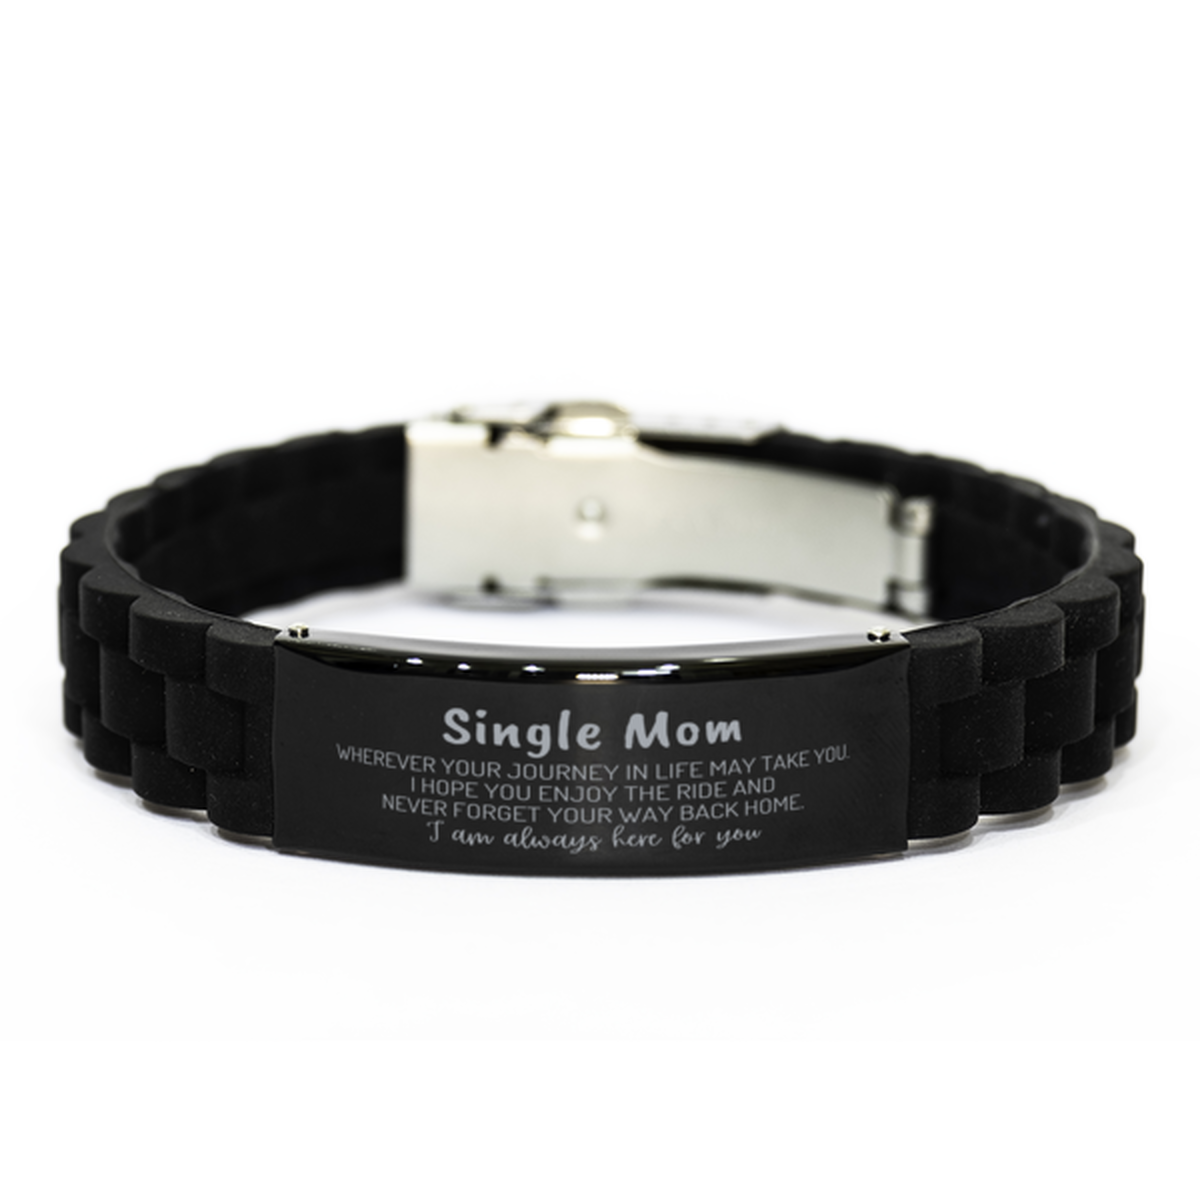 Single Mom wherever your journey in life may take you, I am always here for you Single Mom Black Glidelock Clasp Bracelet, Awesome Christmas Gifts For Single Mom, Single Mom Birthday Gifts for Men Women Family Loved One